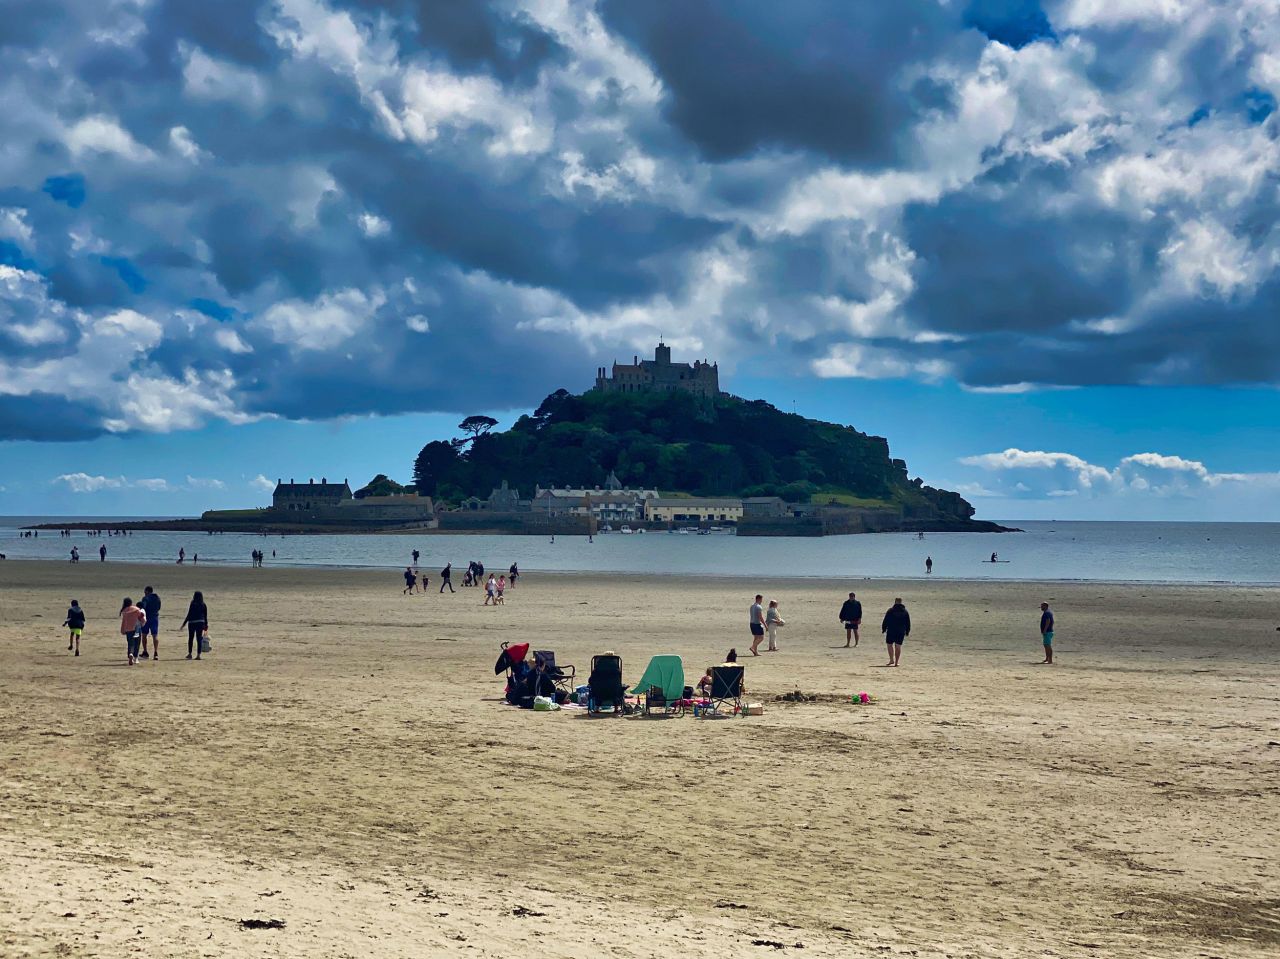 Longrock, one of the UK's most polluted beaches, sits in the fairytale landscape around St. Michael's Mount.